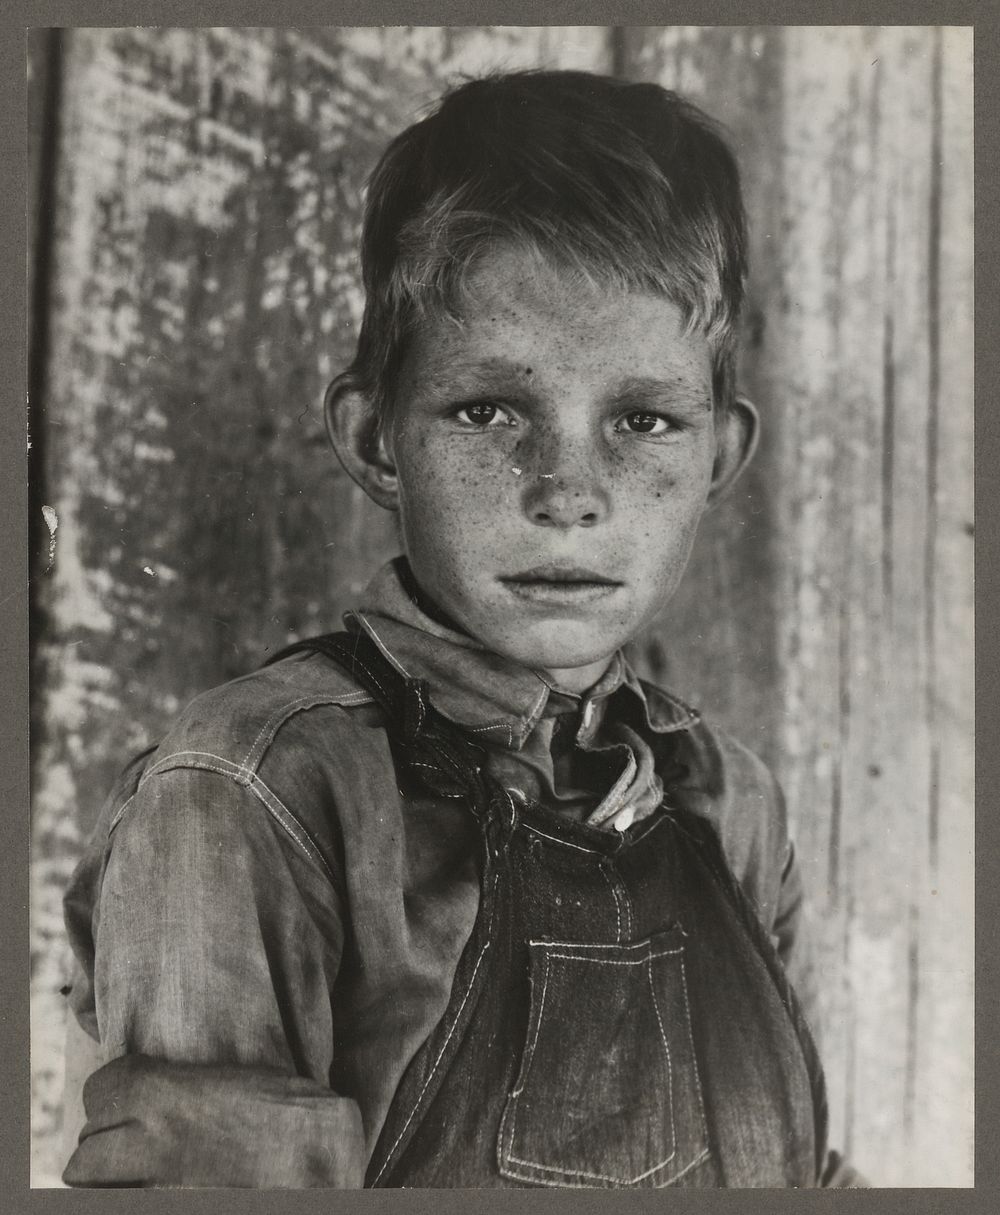 Twelve year old son of a cotton sharecropper near Cleveland, Mississippi. Sourced from the Library of Congress.